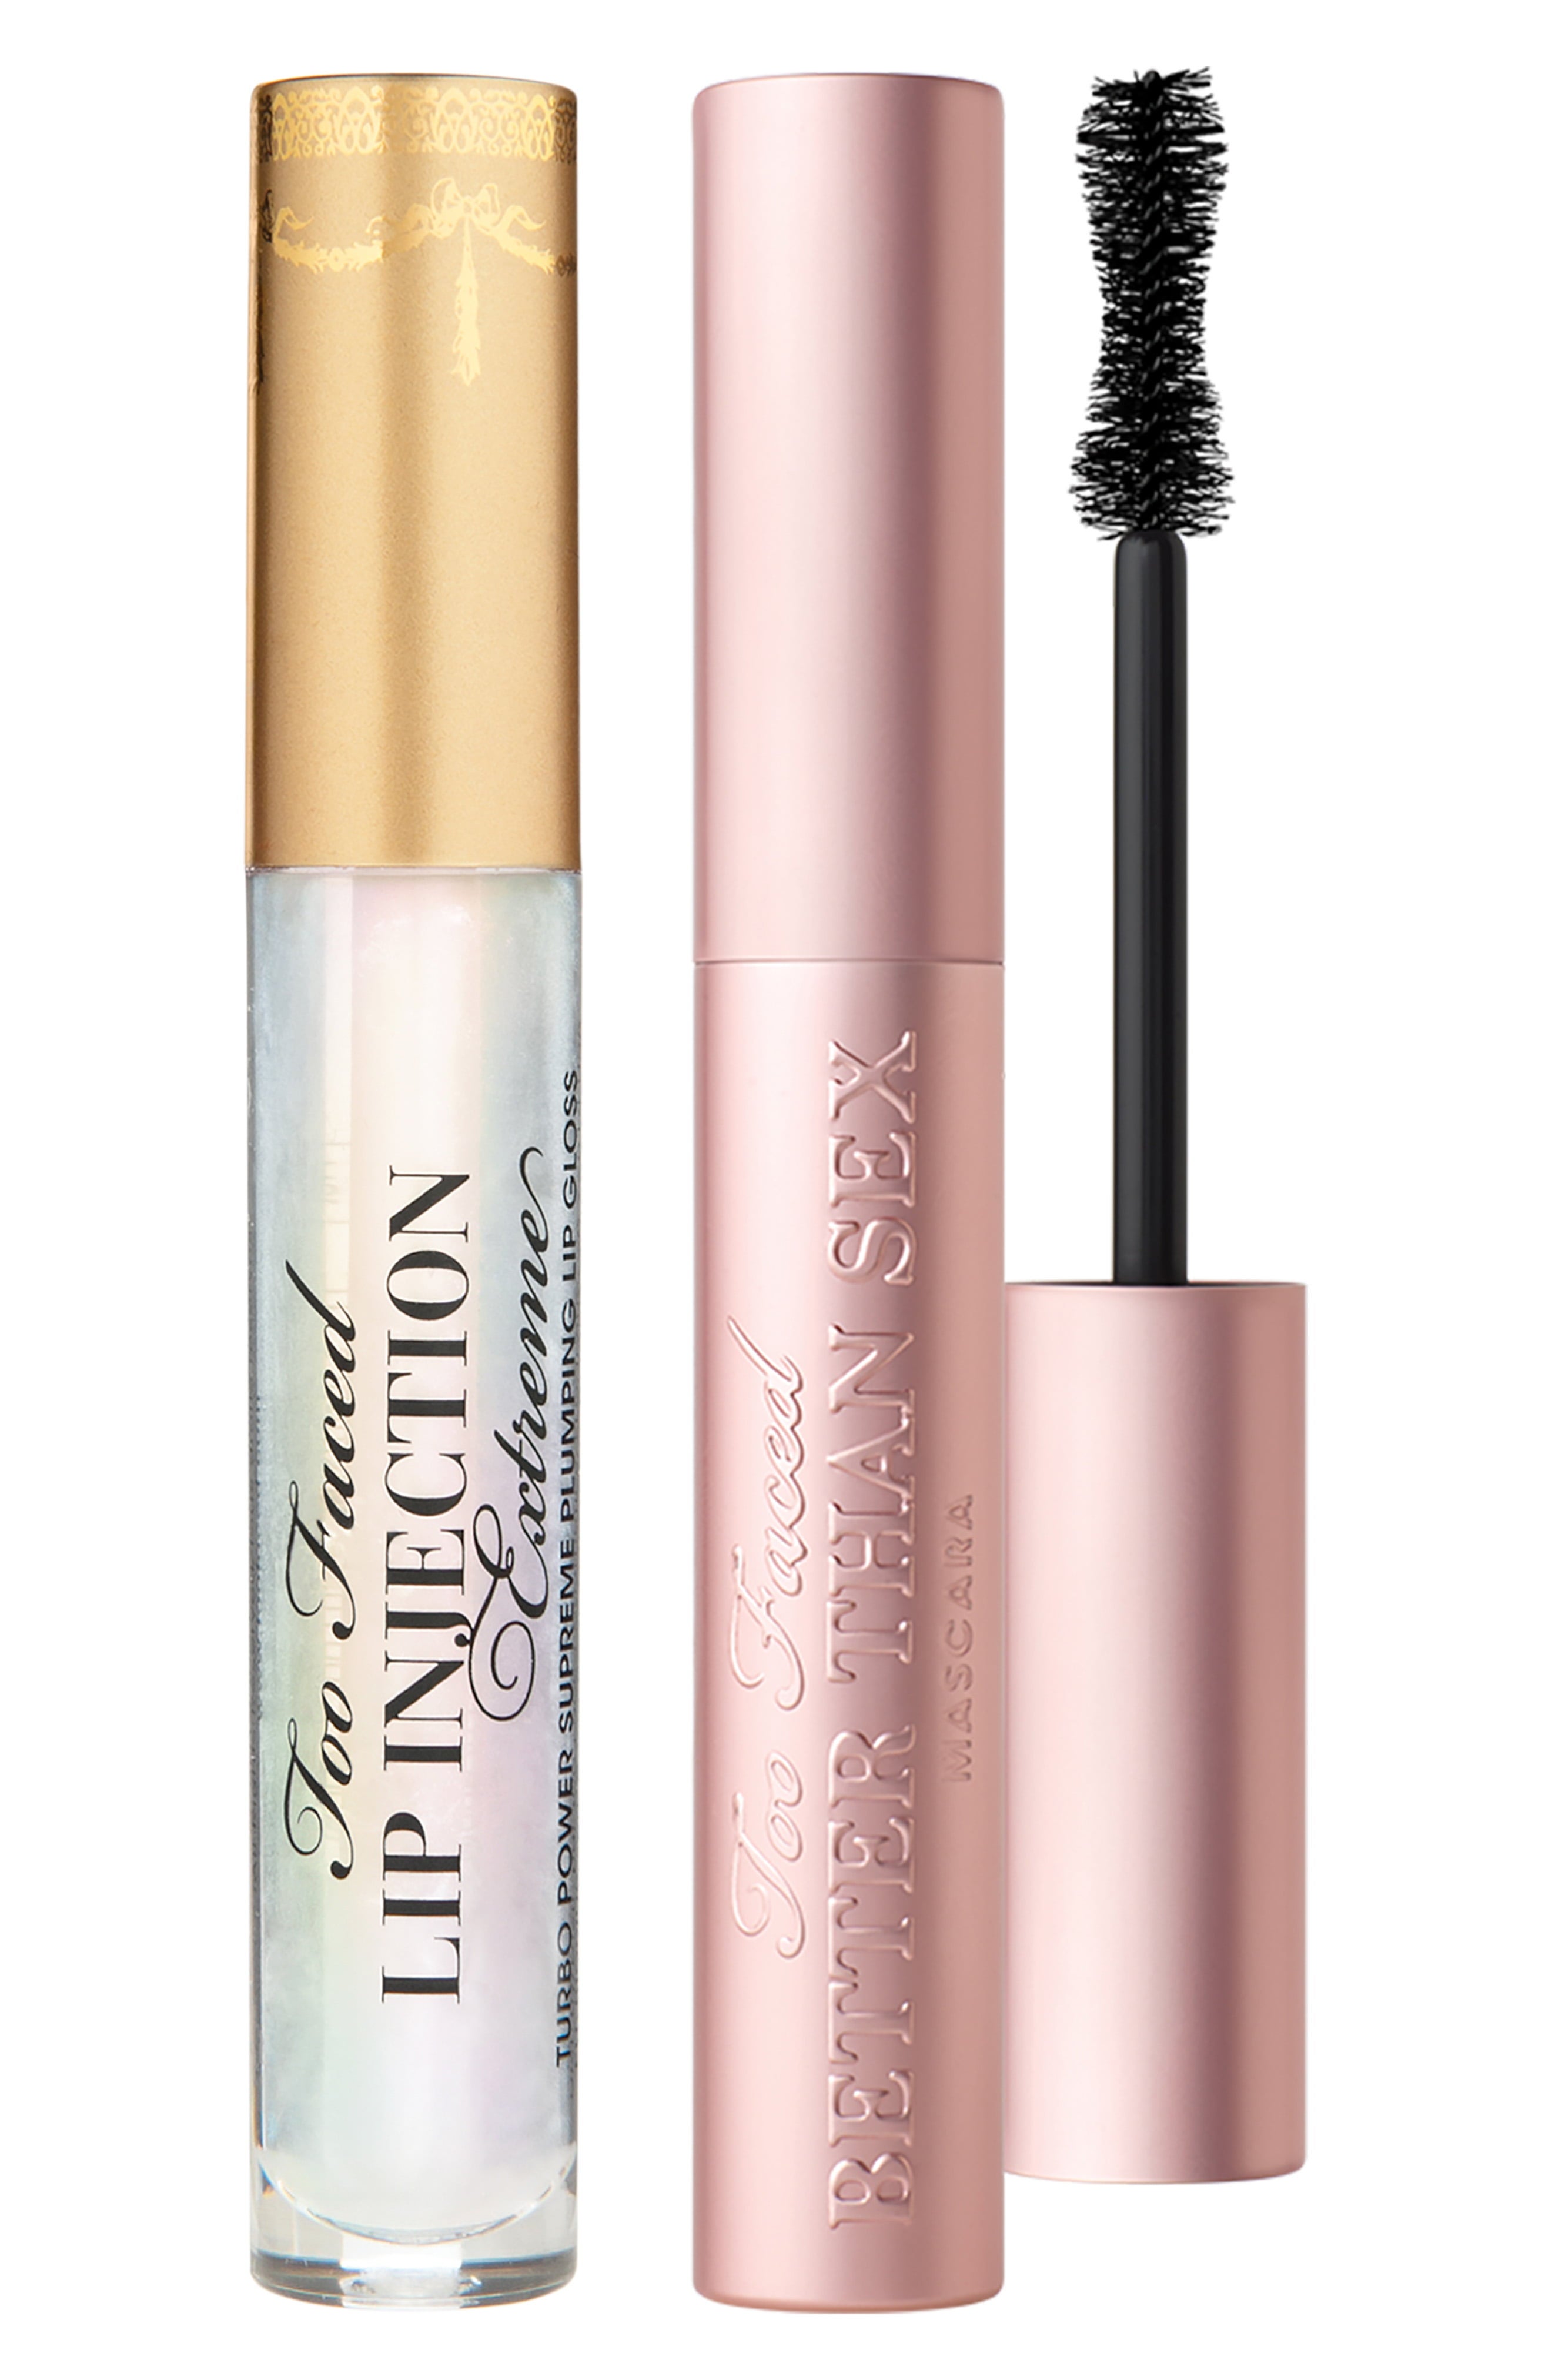 Too Faced + Plump Lips & Sexy Lashes Duo ($54 Value)